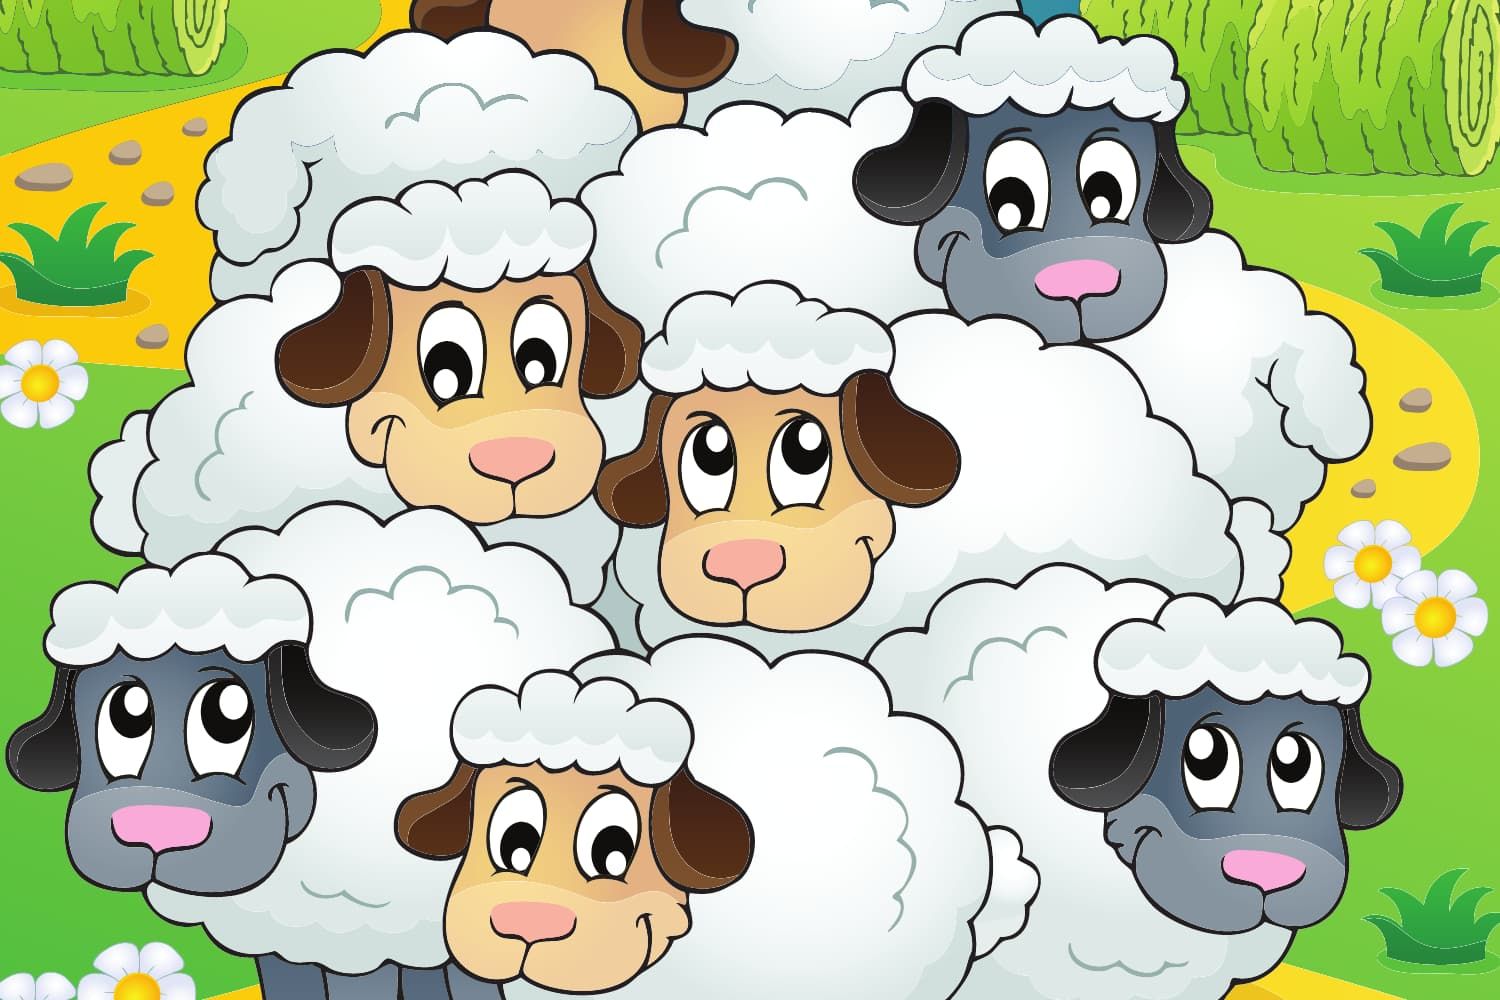 Game%20-%20NT%20Parable%20of%20the%20lost%20sheep%20-%20Count%20the%20sheep-b72376df Luke